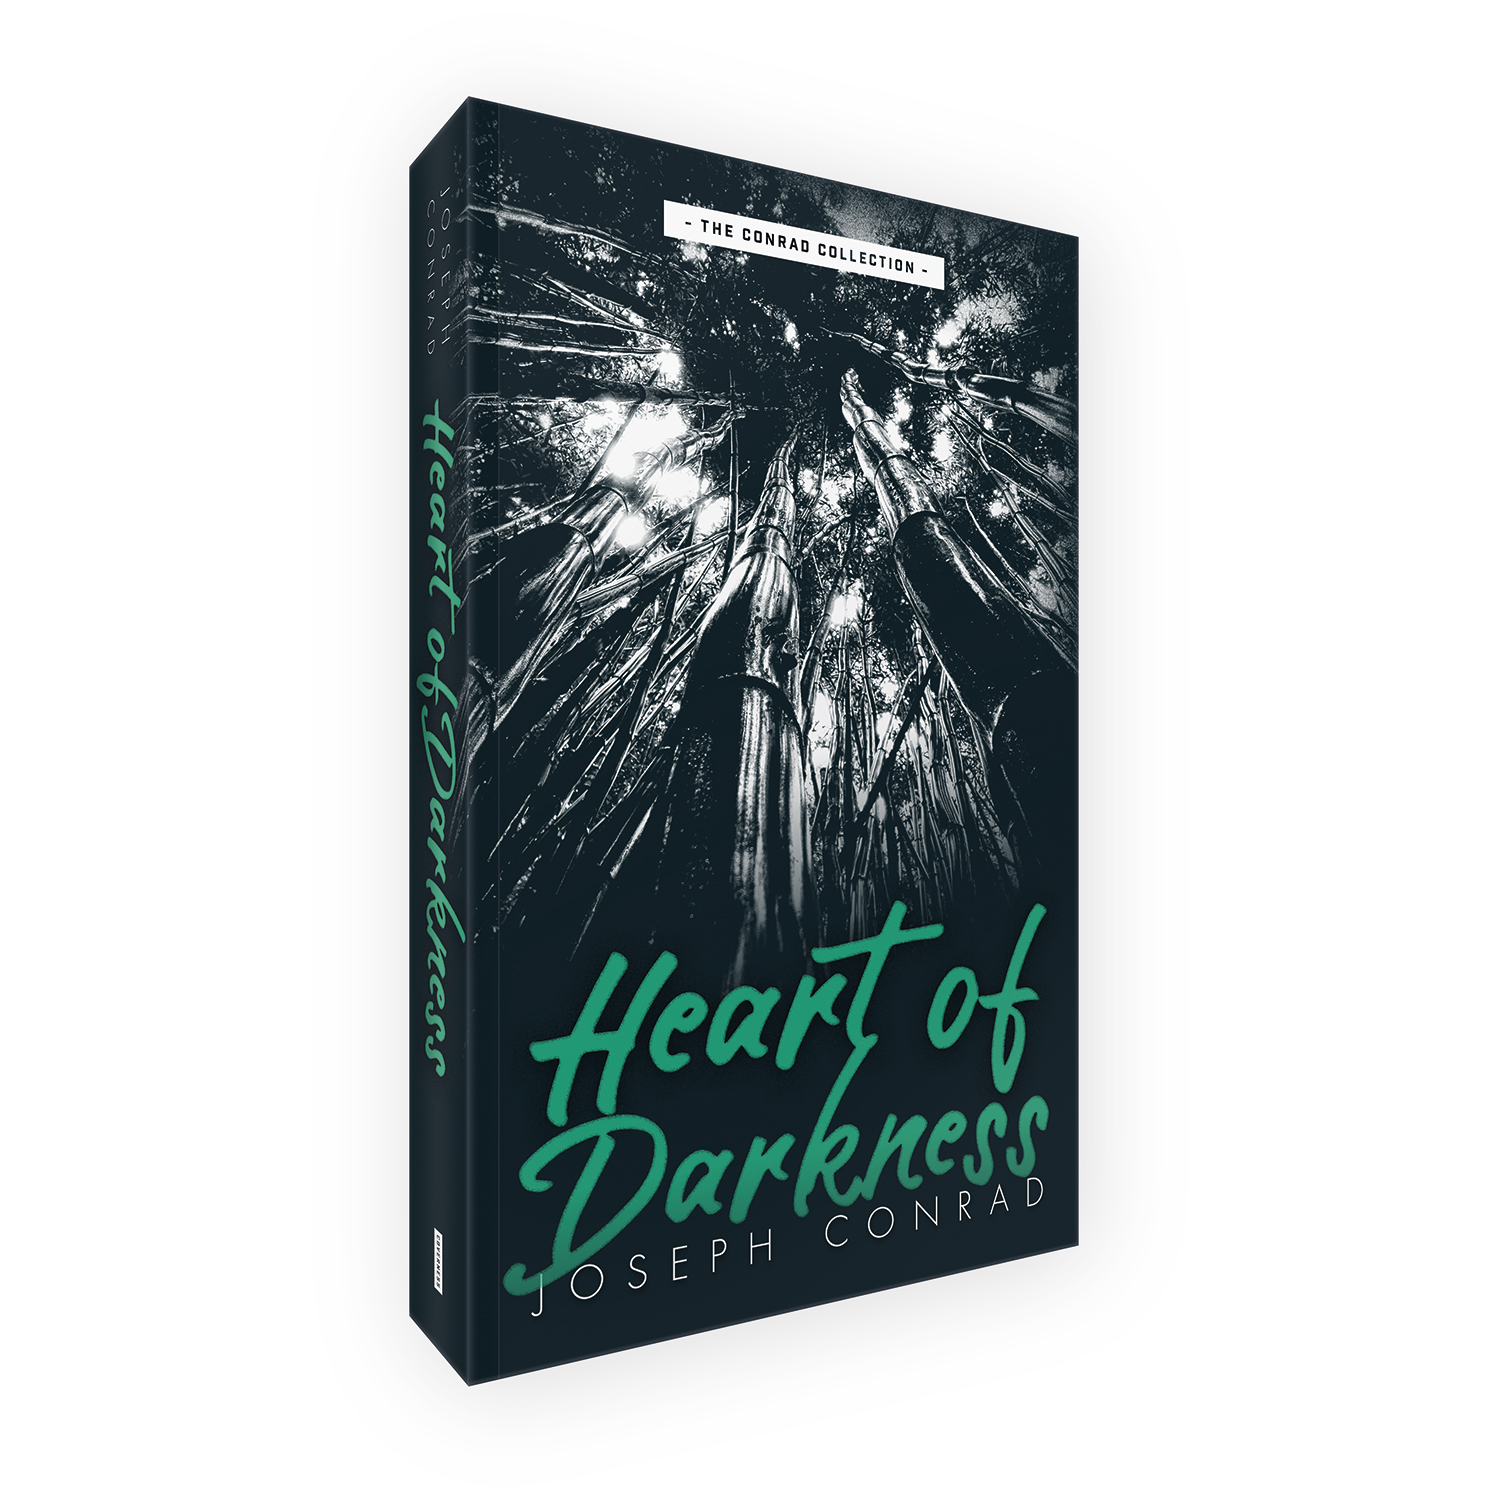 'Heart of Darkness' is a bespoke cover design for the classic novel by Joseph Conrad. The book cover was designed by Mark Thomas, of coverness.com. To find out more about my book design services, please visit www.coverness.com.